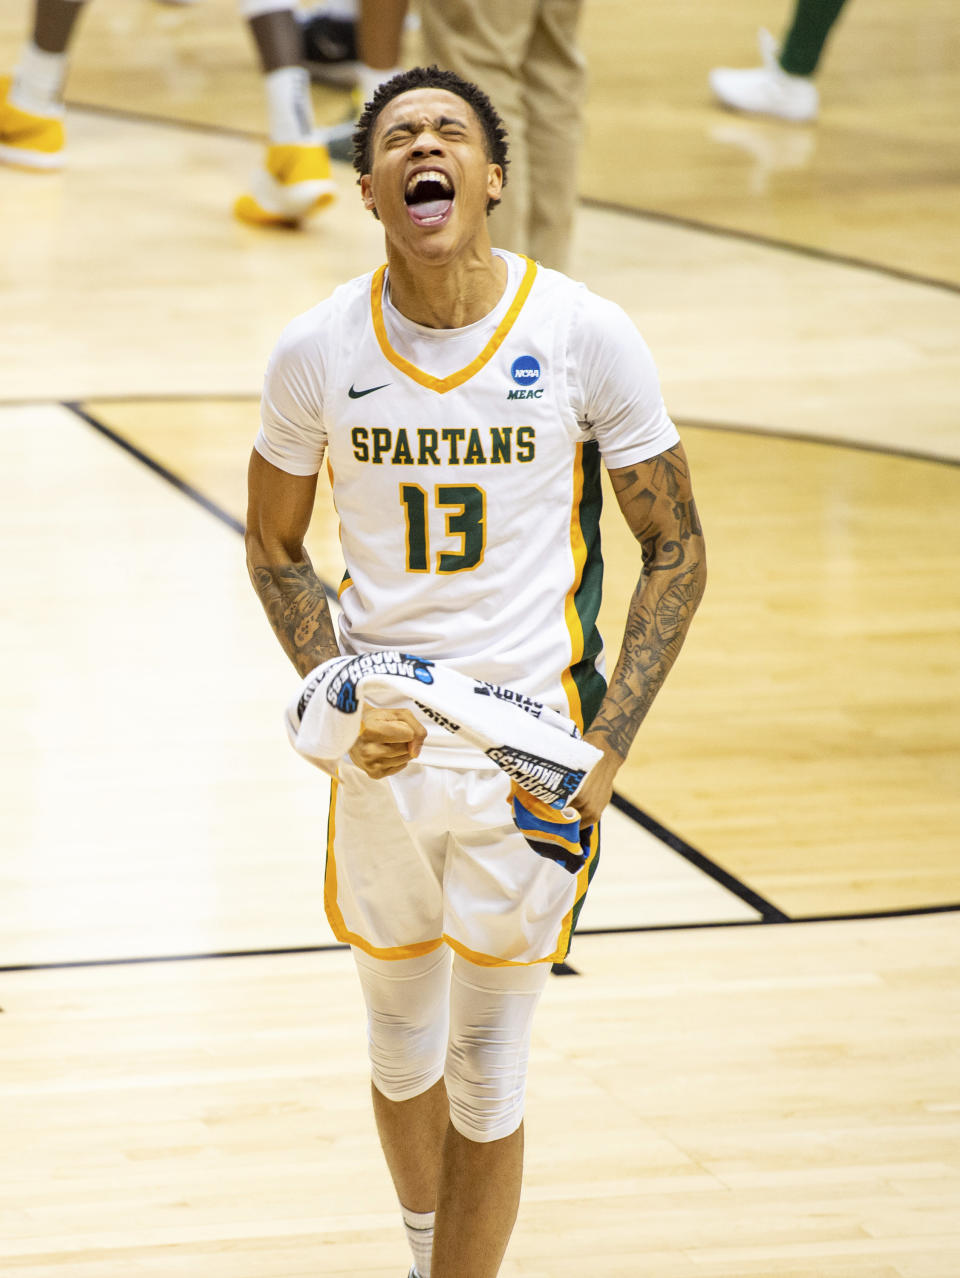 Norfolk State guard Daryl Anderson (13) reacts after his team's defeat of Appalachian State in a First Four game in the NCAA men's college basketball tournament, Thursday, March 18, 2021, in Bloomington, Ind. (AP Photo/Doug McSchooler)